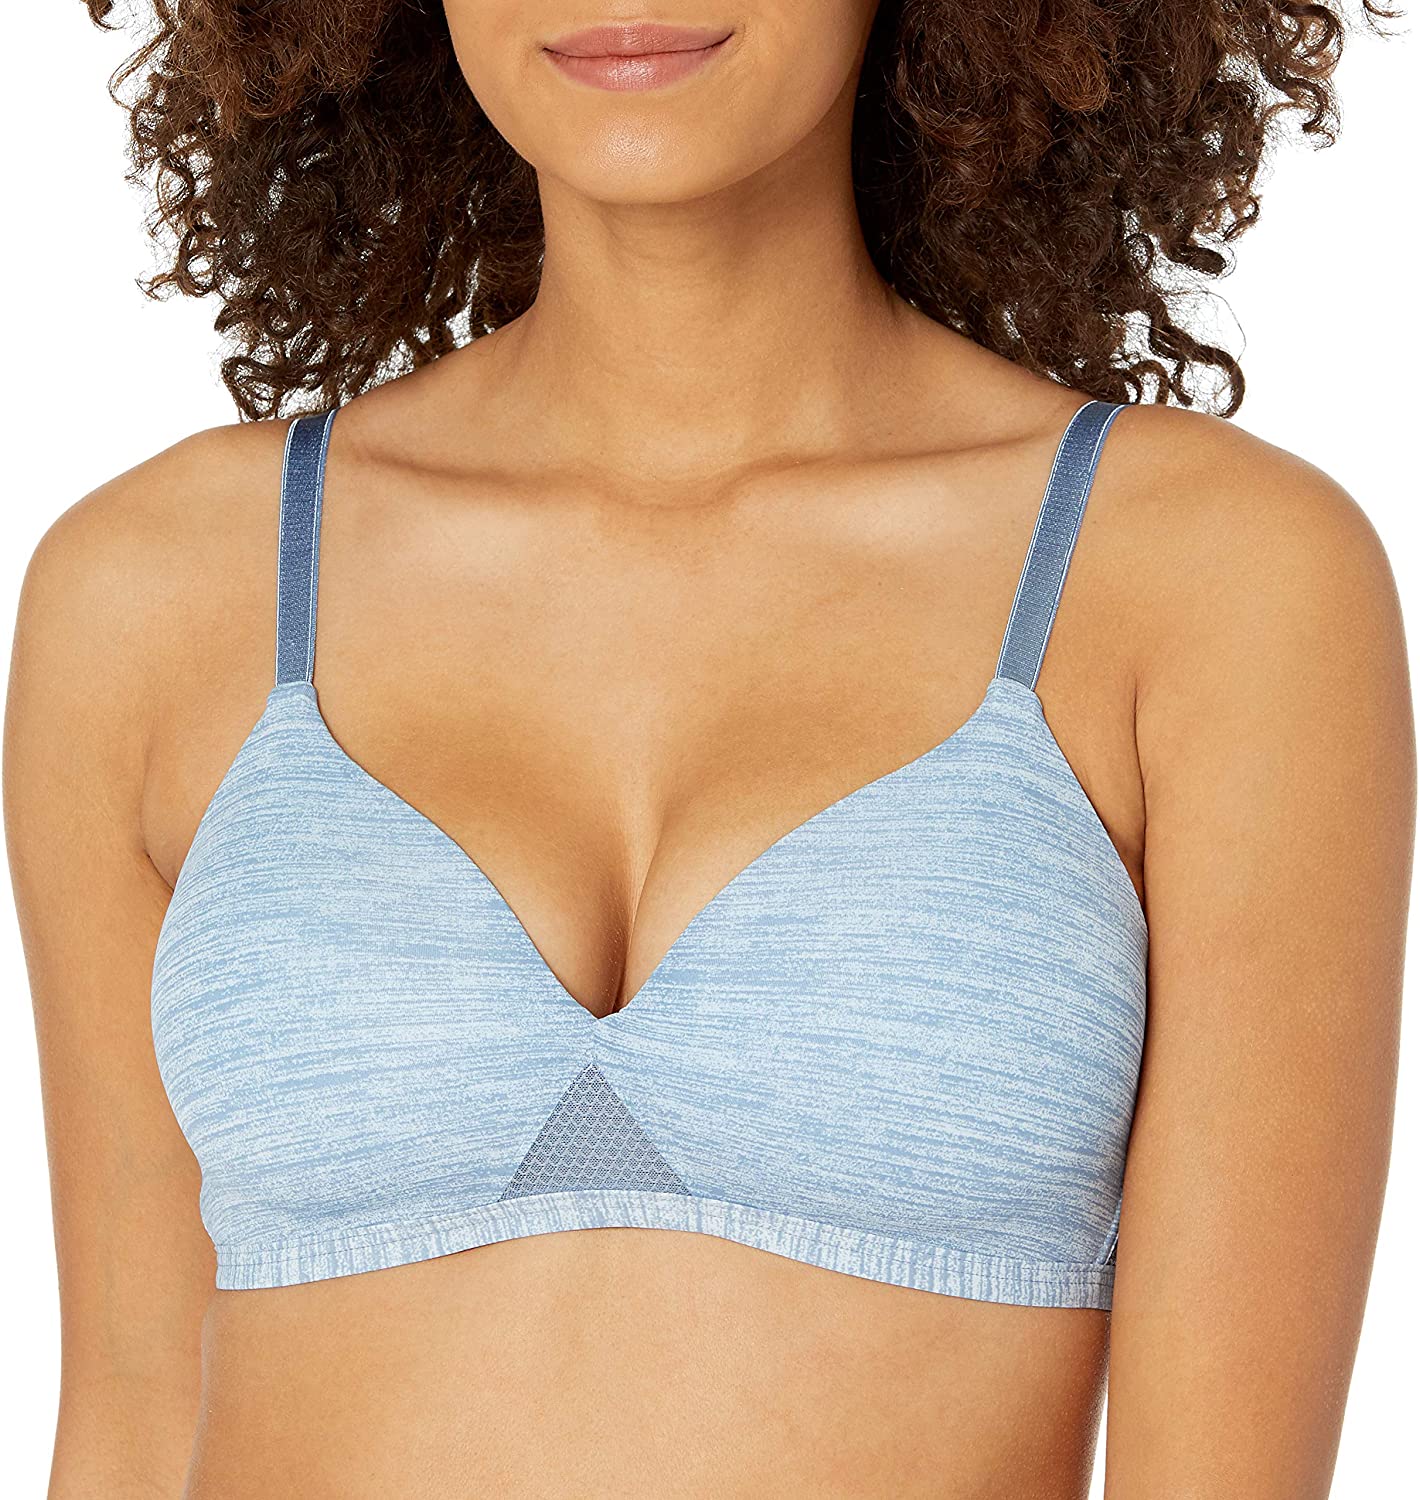 Best Cool Padded Bra for a Small Chest 8 Best Padded Bras for a Small Chest - Bust-Boosters & Natural Shapes!